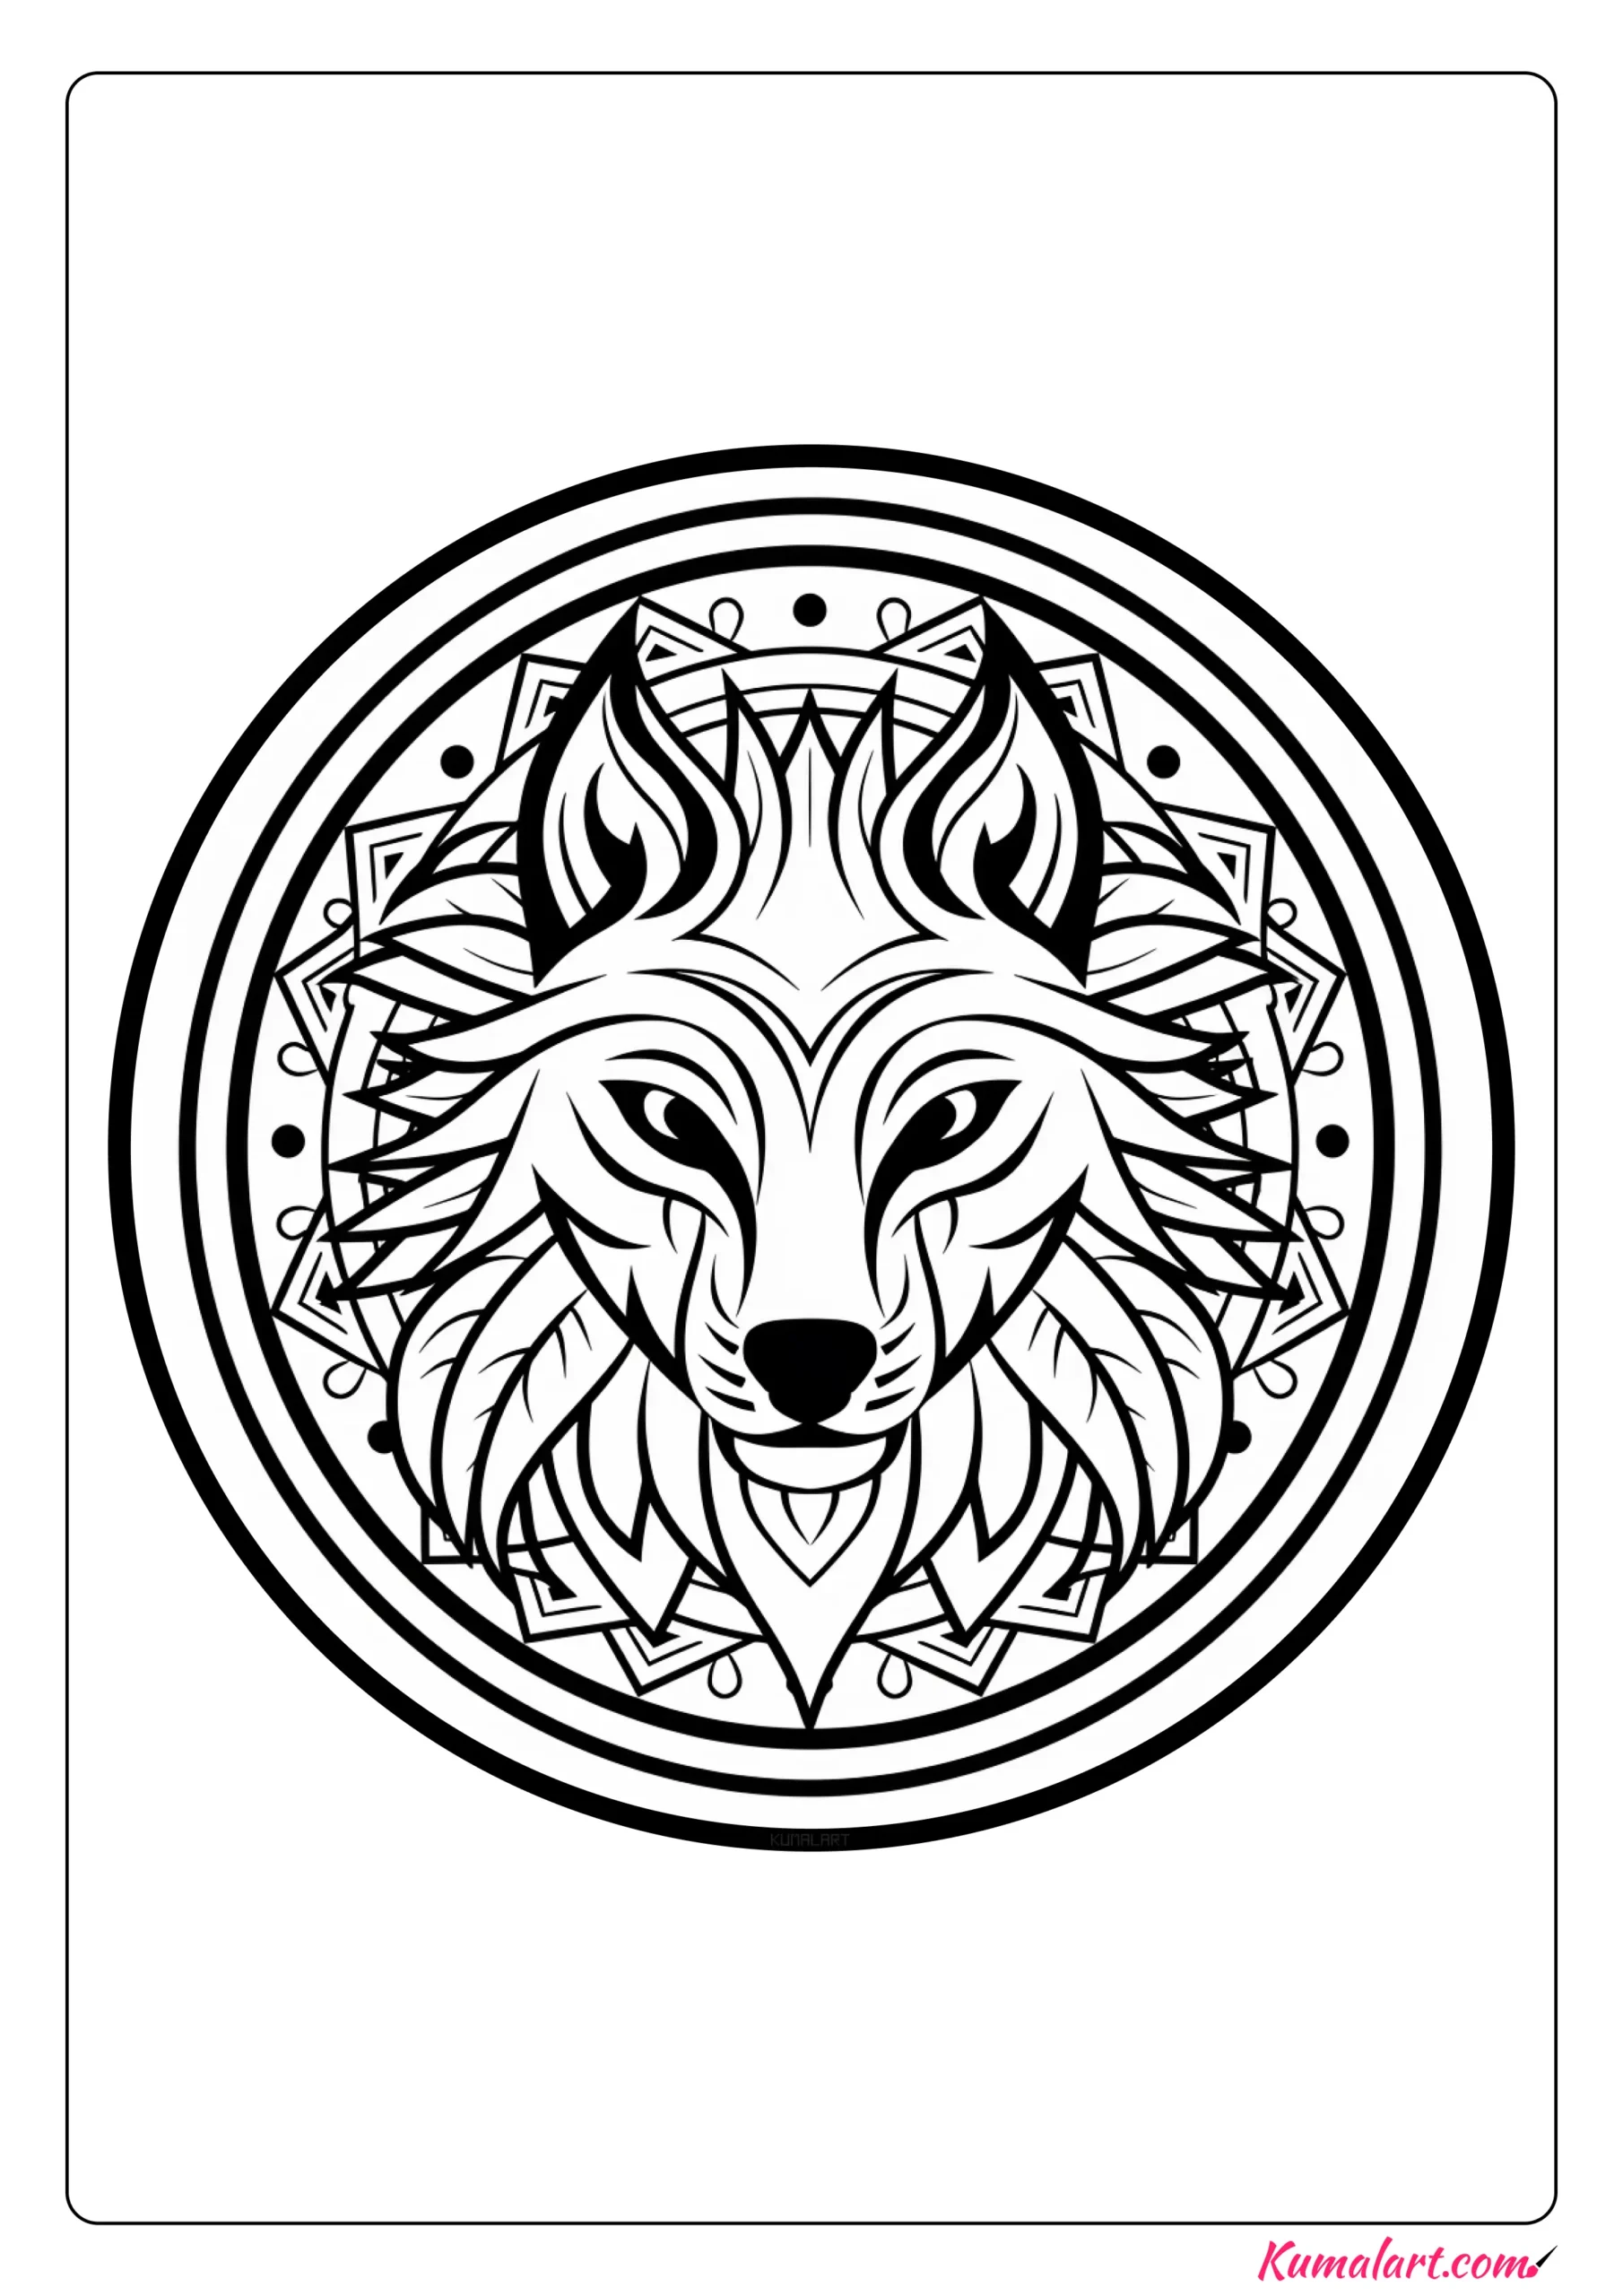 Leo the Wolf Coloring Page